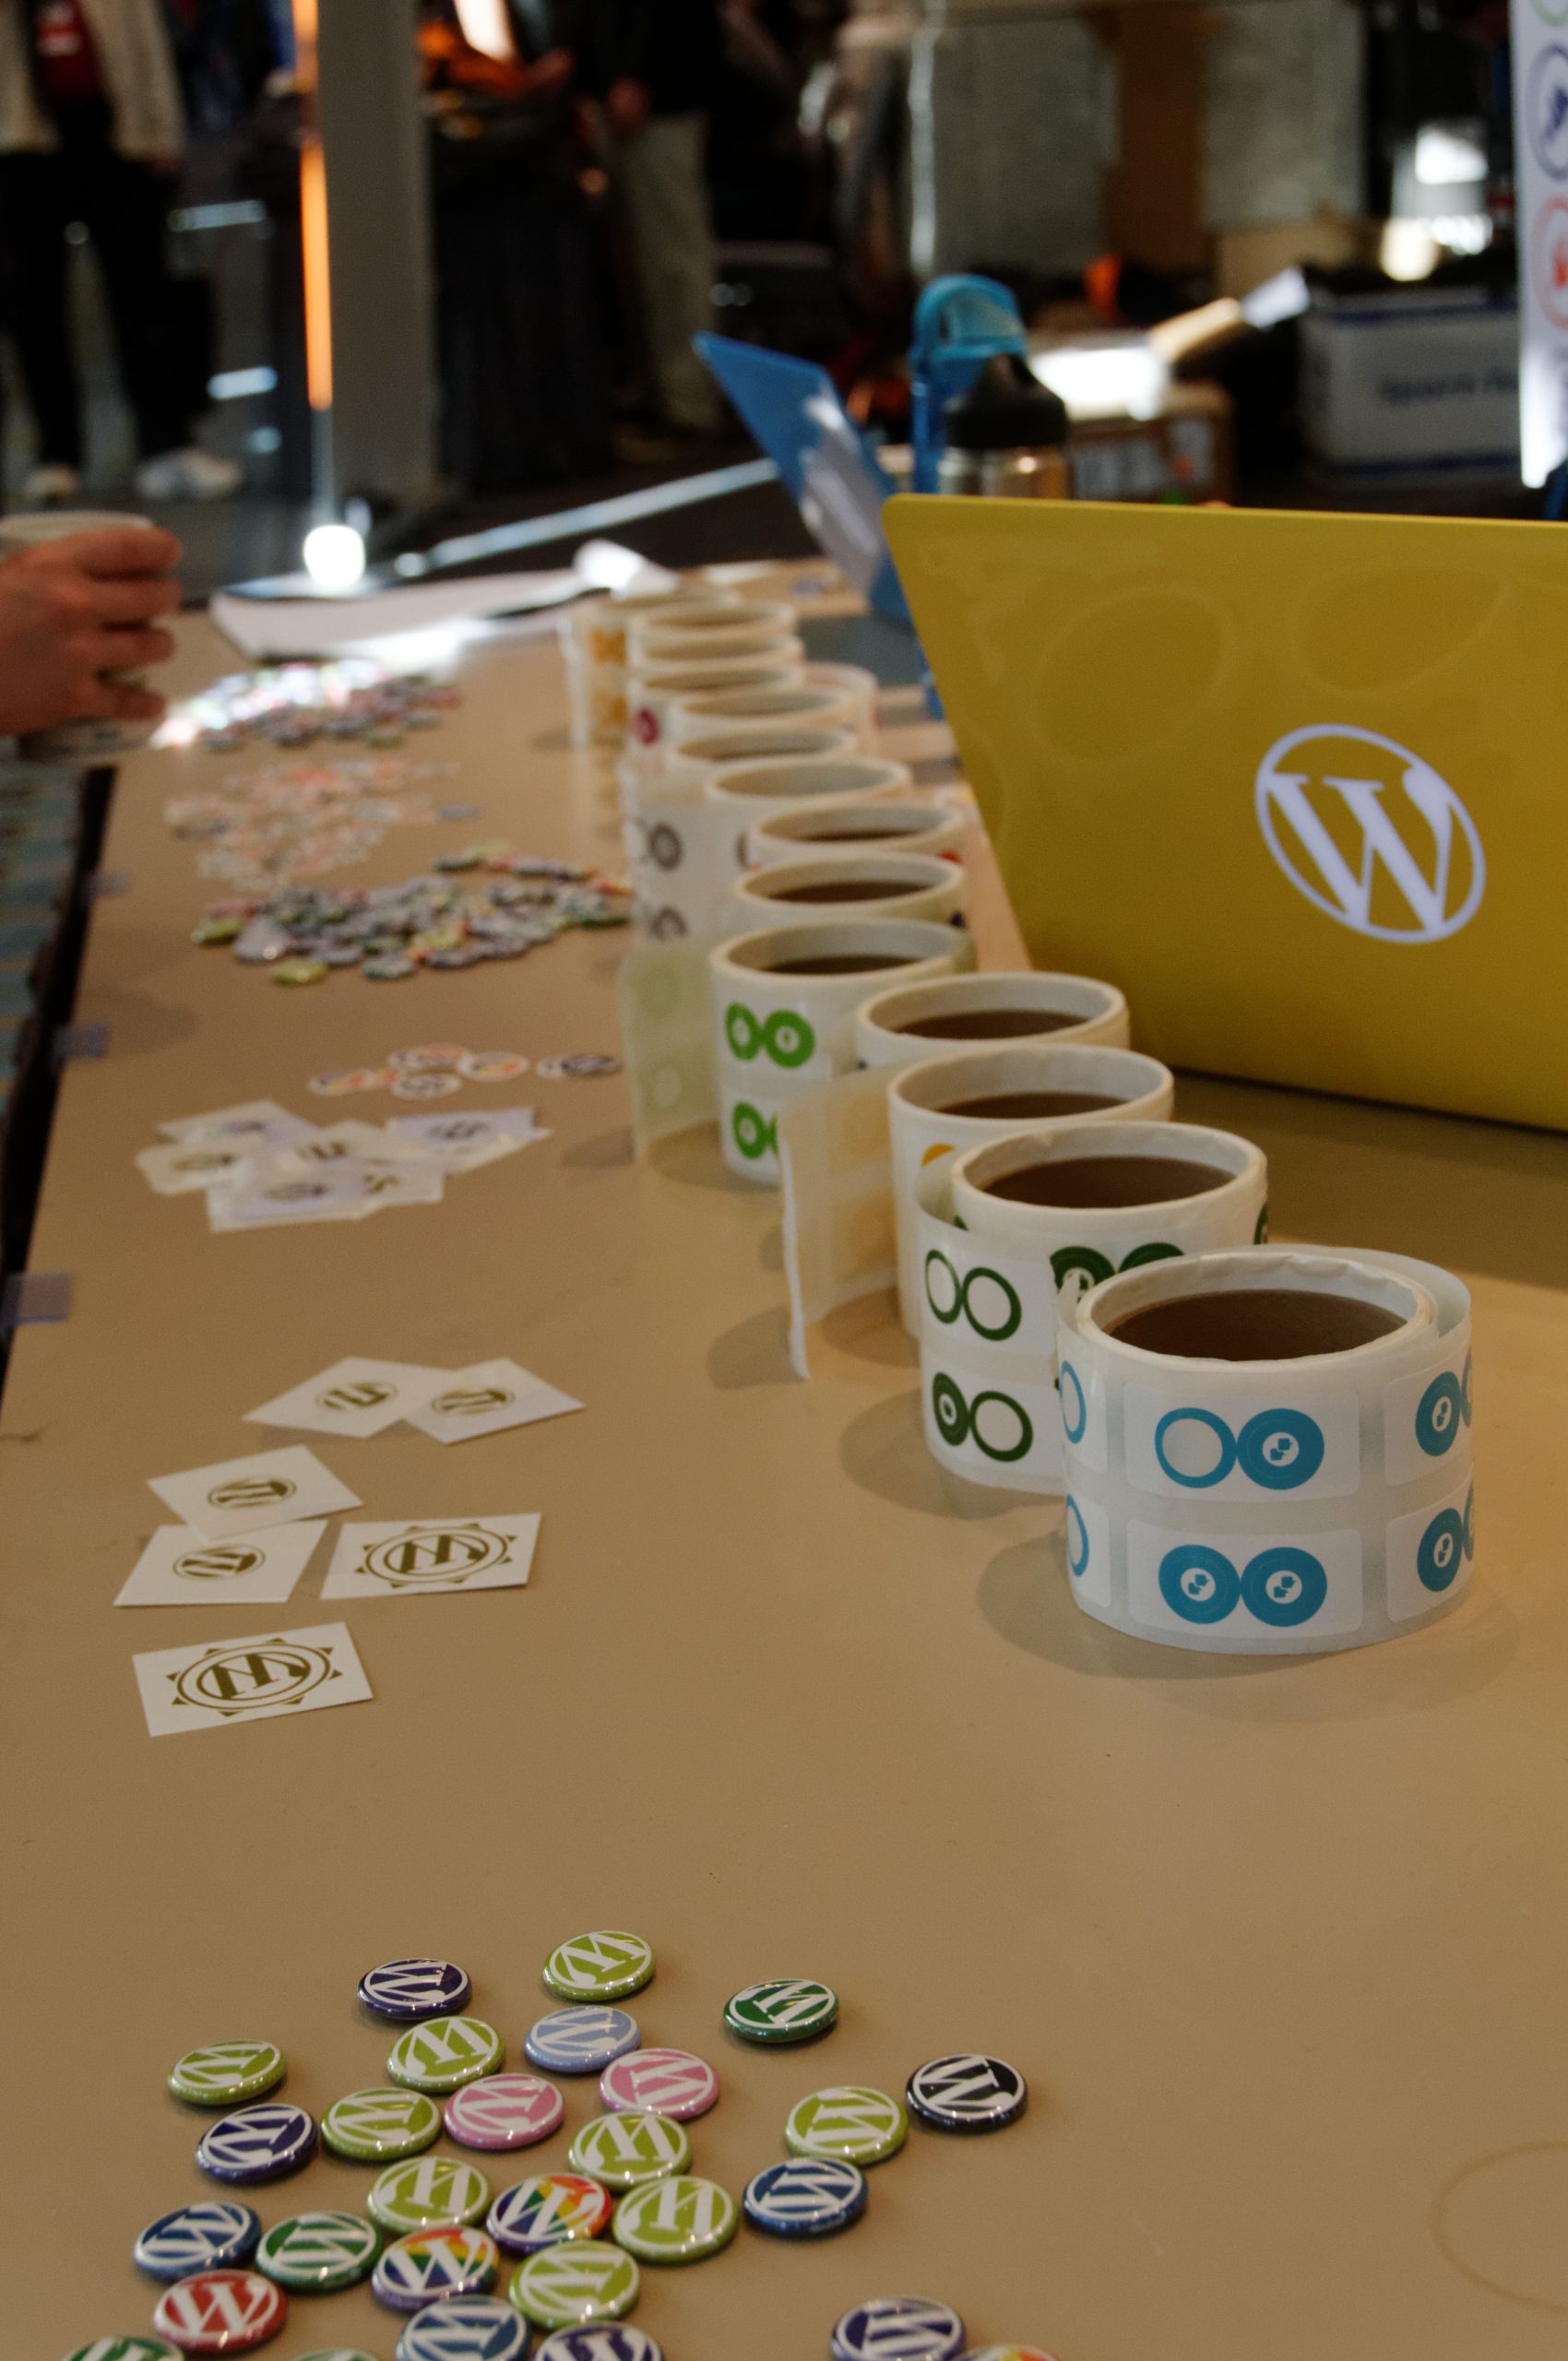 WordPress pins, stickers, and a laptop sit neatly on a table at a WordCamp event